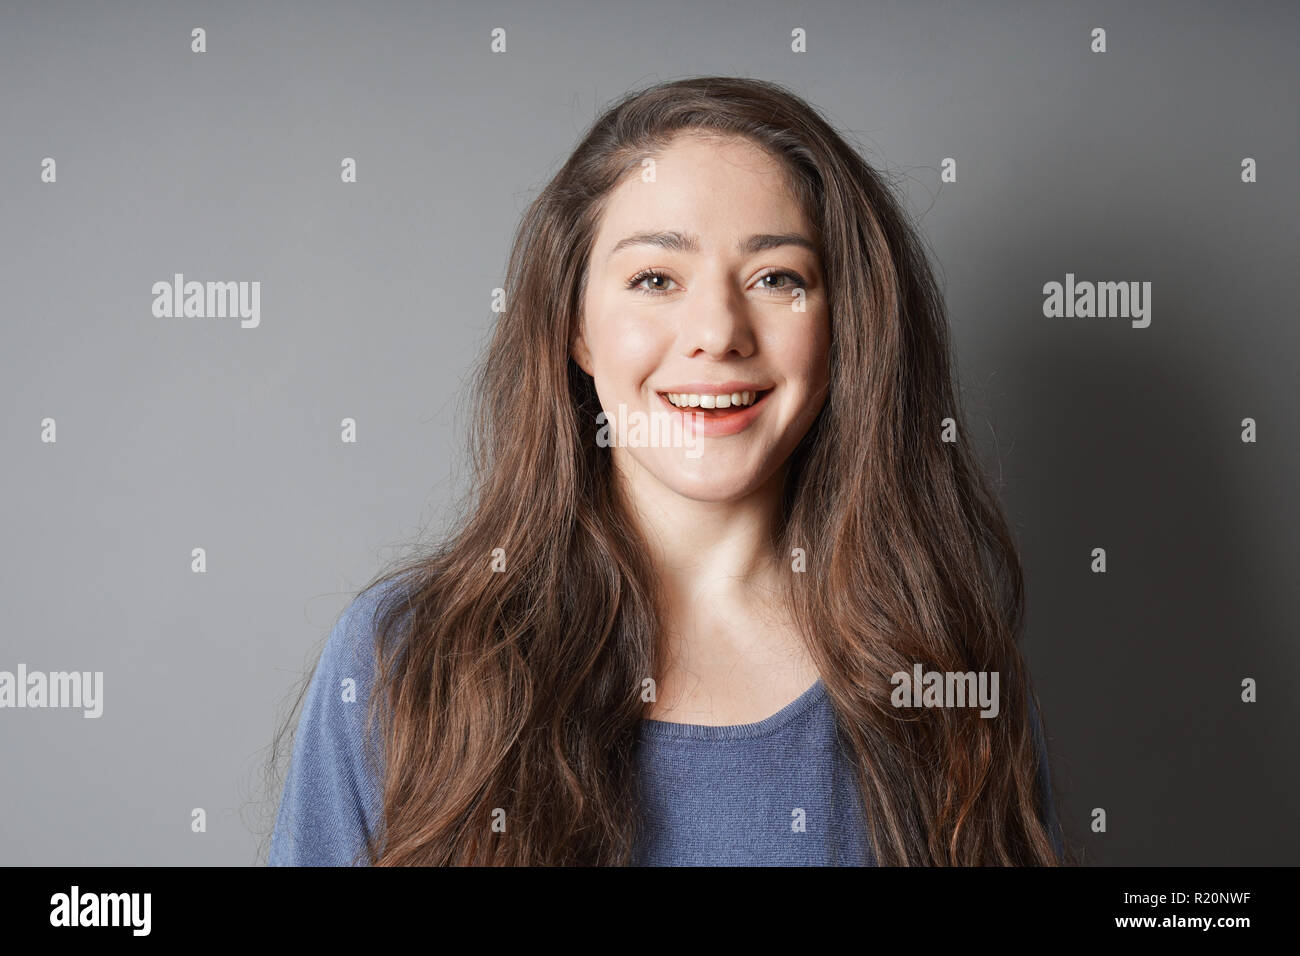 happy young woman in her 20s with big toothy smile Stock Photo